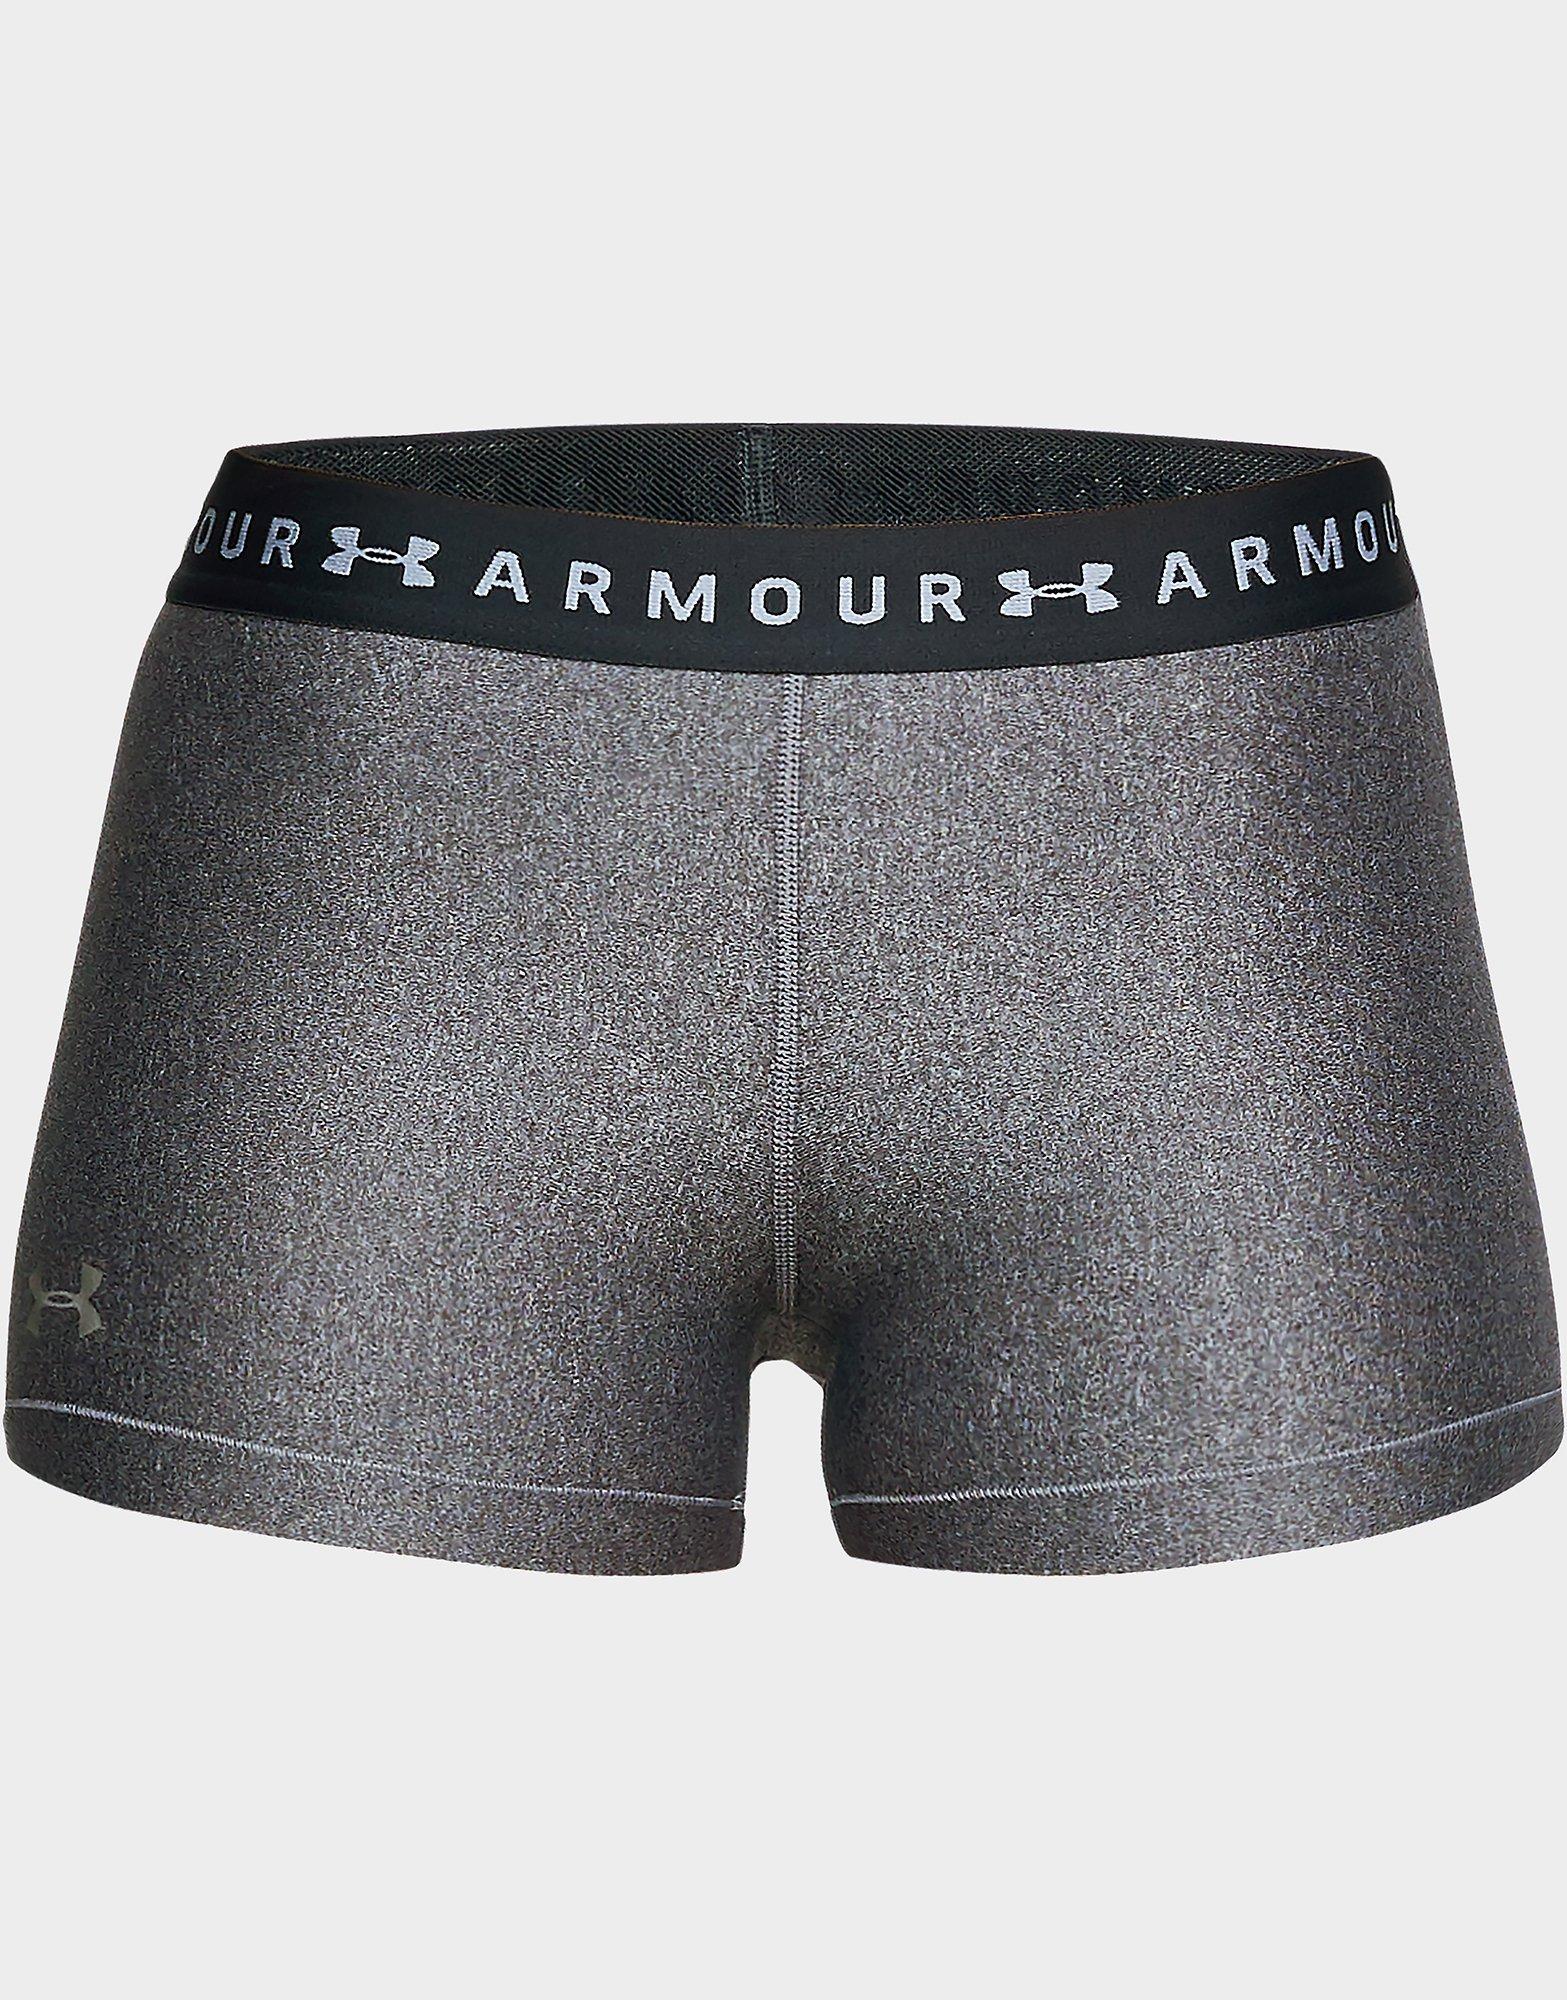 white under armour shorts womens